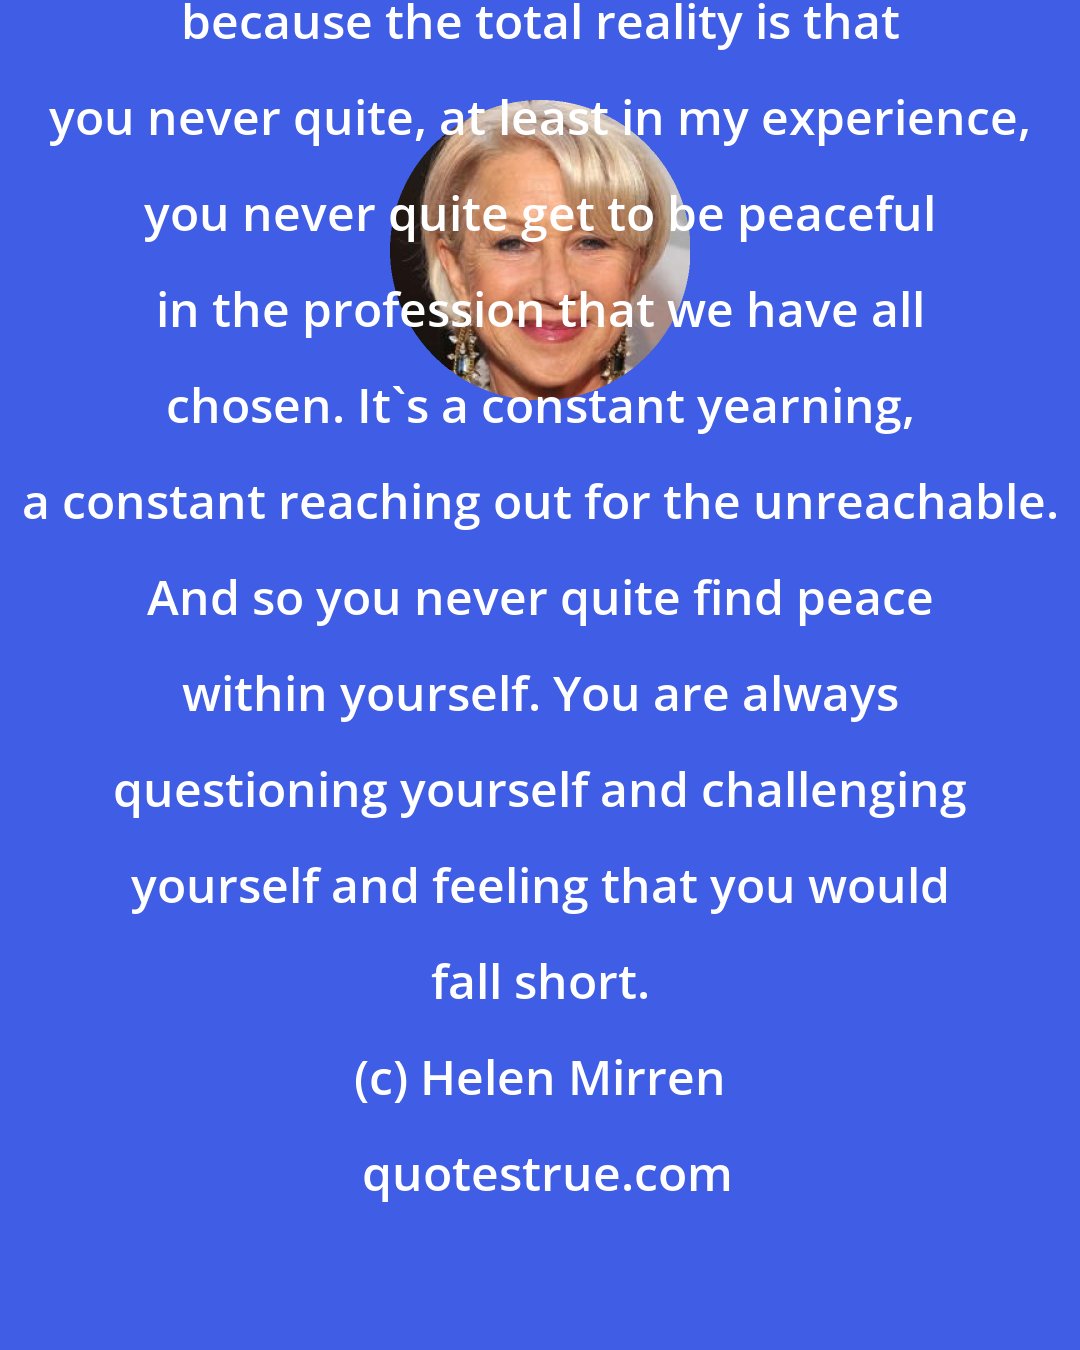 Helen Mirren: I am for peace and all kinds of ways because the total reality is that you never quite, at least in my experience, you never quite get to be peaceful in the profession that we have all chosen. It's a constant yearning, a constant reaching out for the unreachable. And so you never quite find peace within yourself. You are always questioning yourself and challenging yourself and feeling that you would fall short.